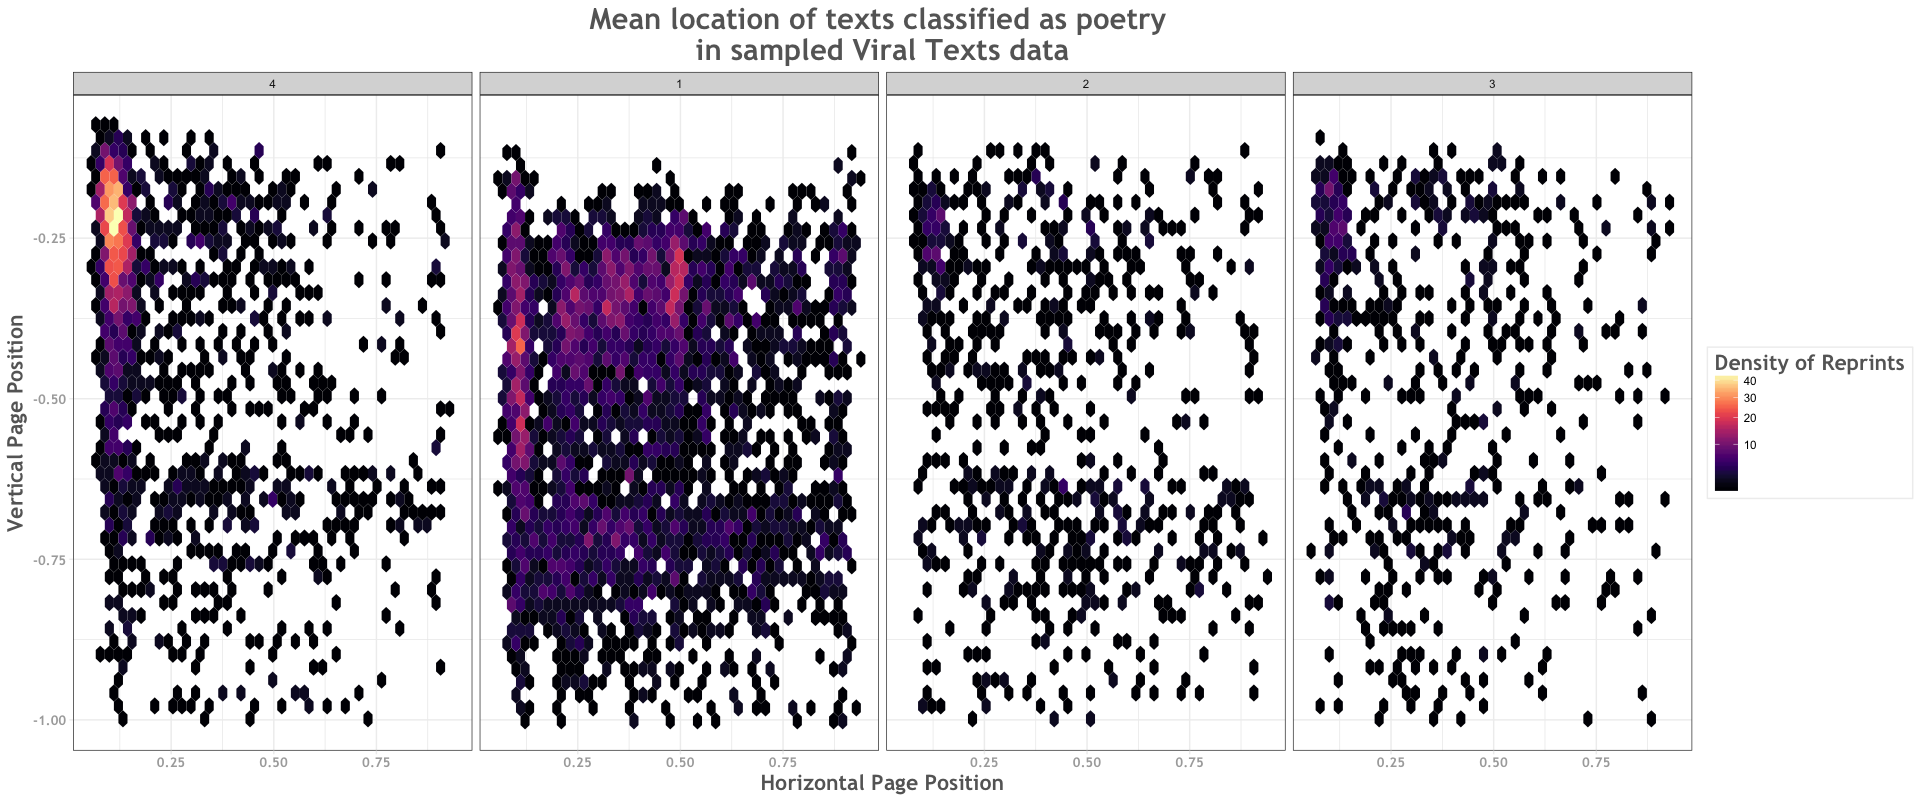 The mean location of reprinted poems sampled from the Viral Texts data and classified through Jonathan Fitzgerald's genre detection work.